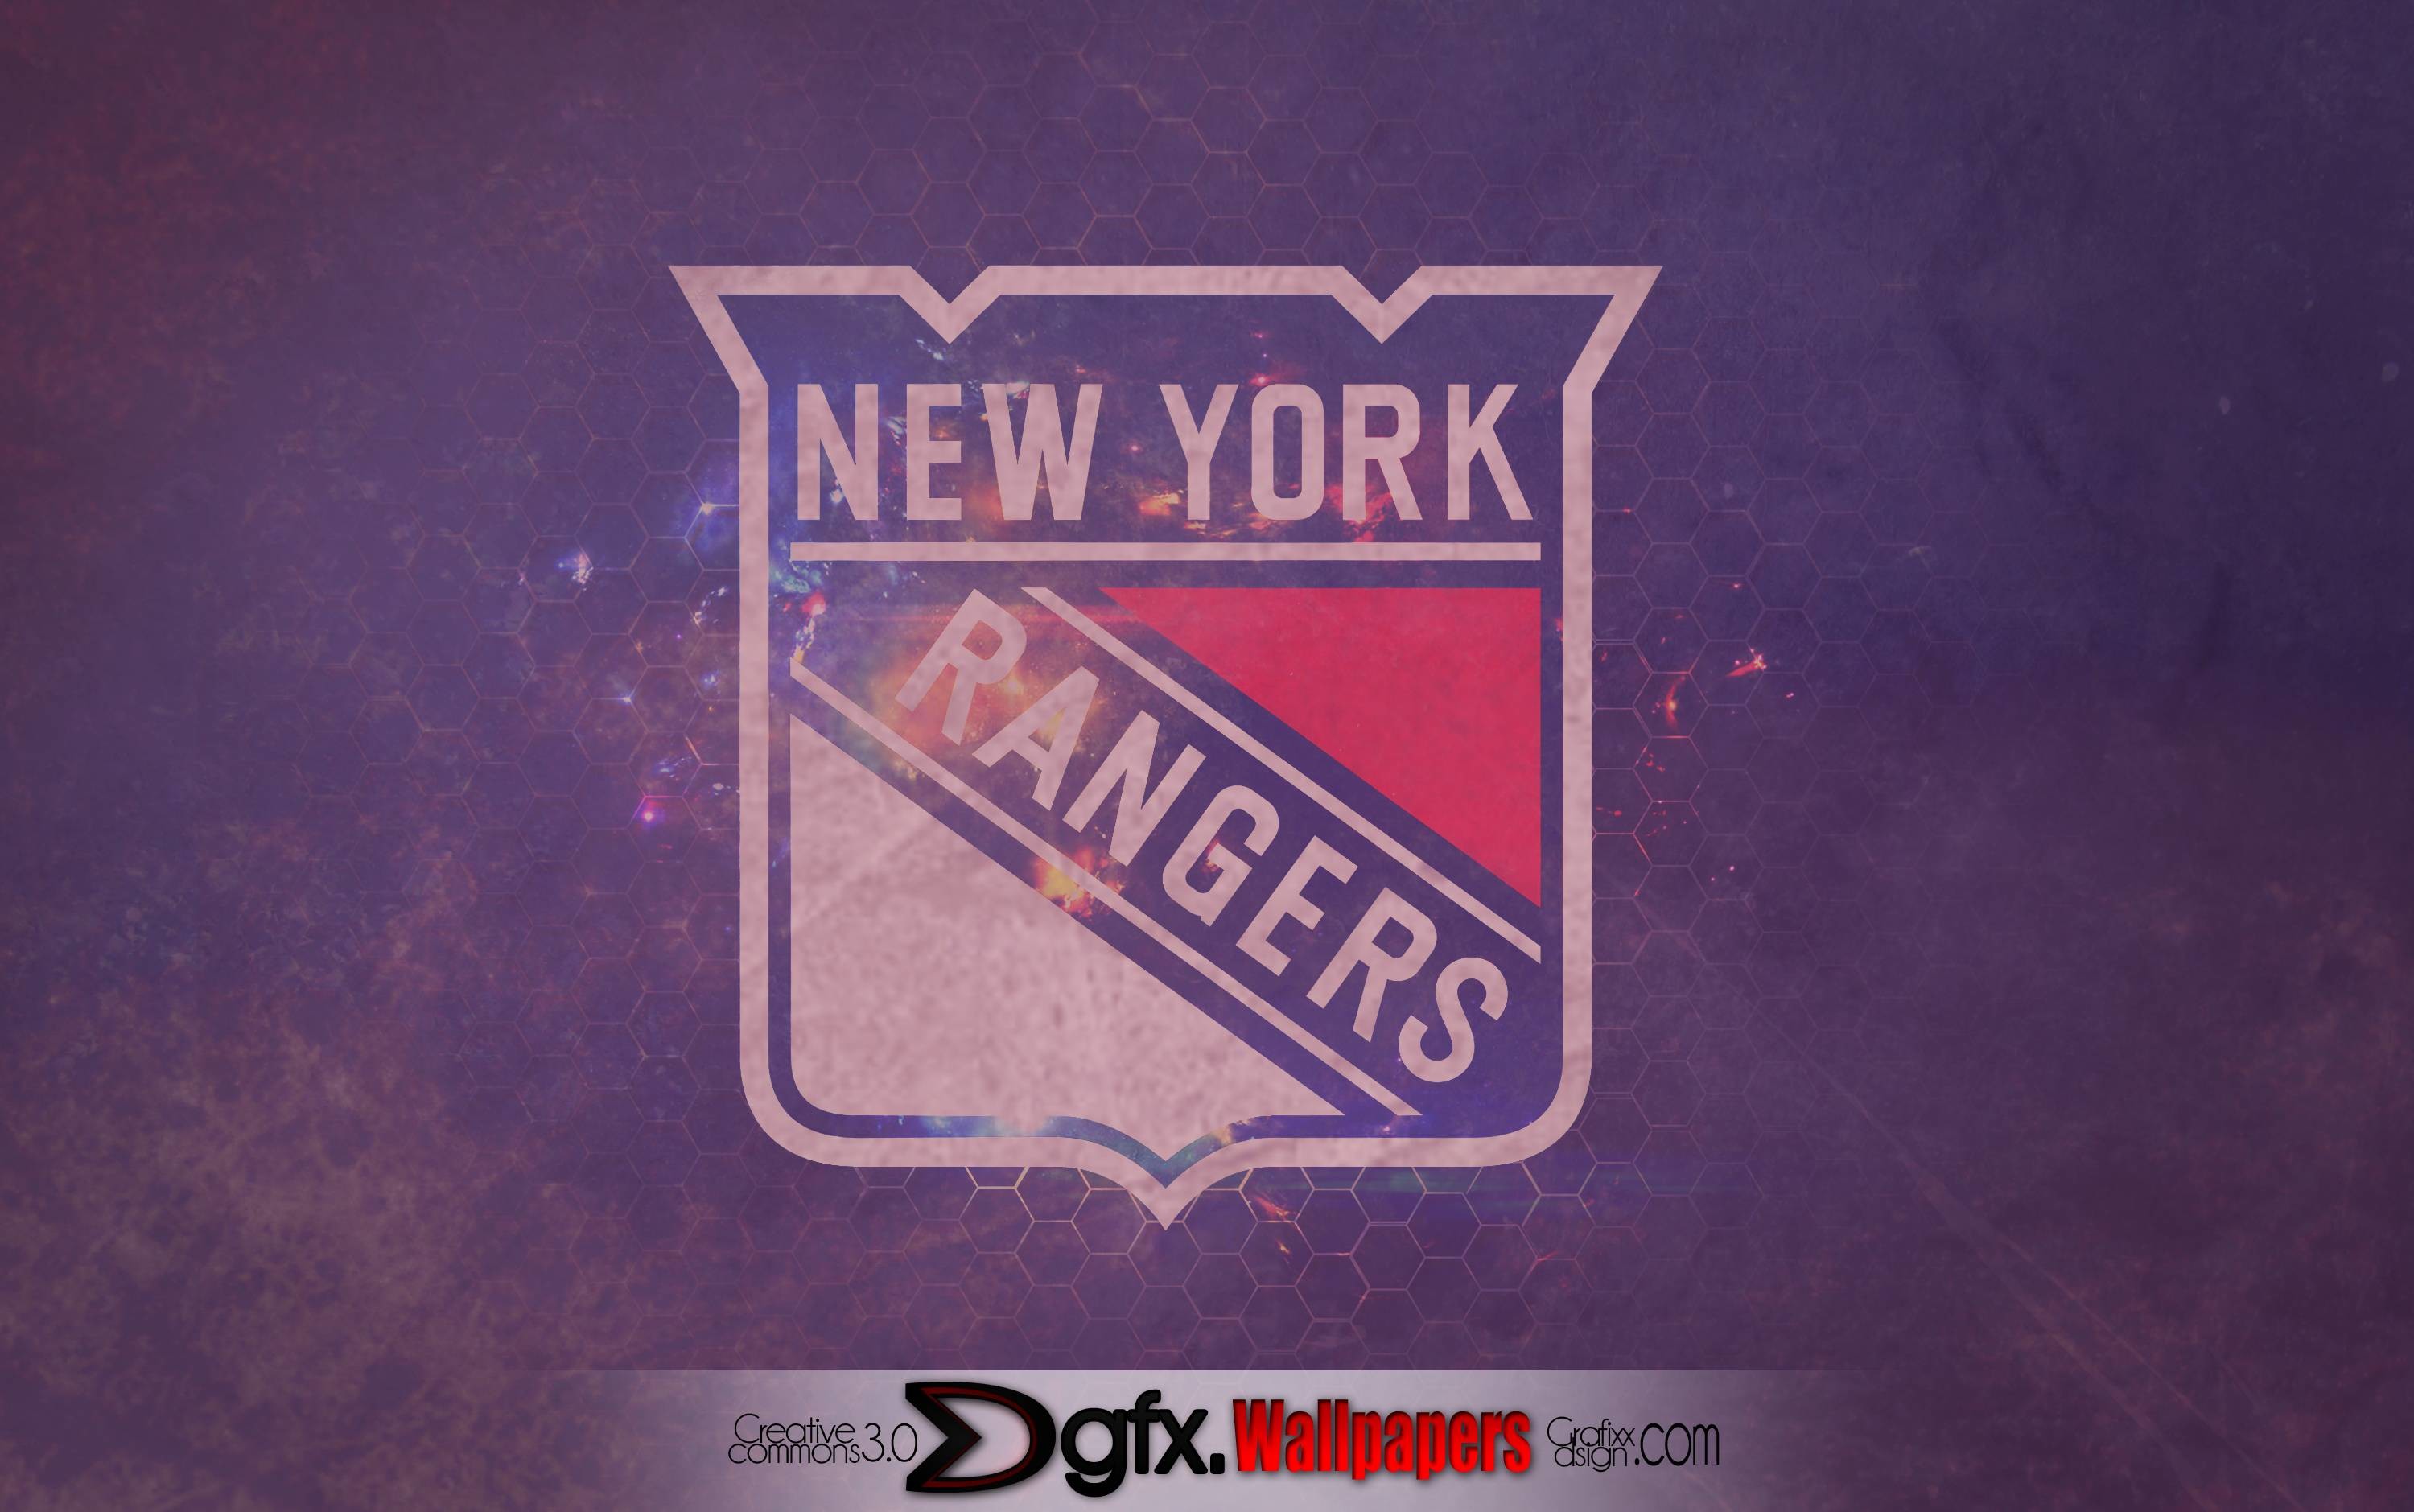 3000x1879 New York Rangers wallpapers | New York Rangers background - Page 6